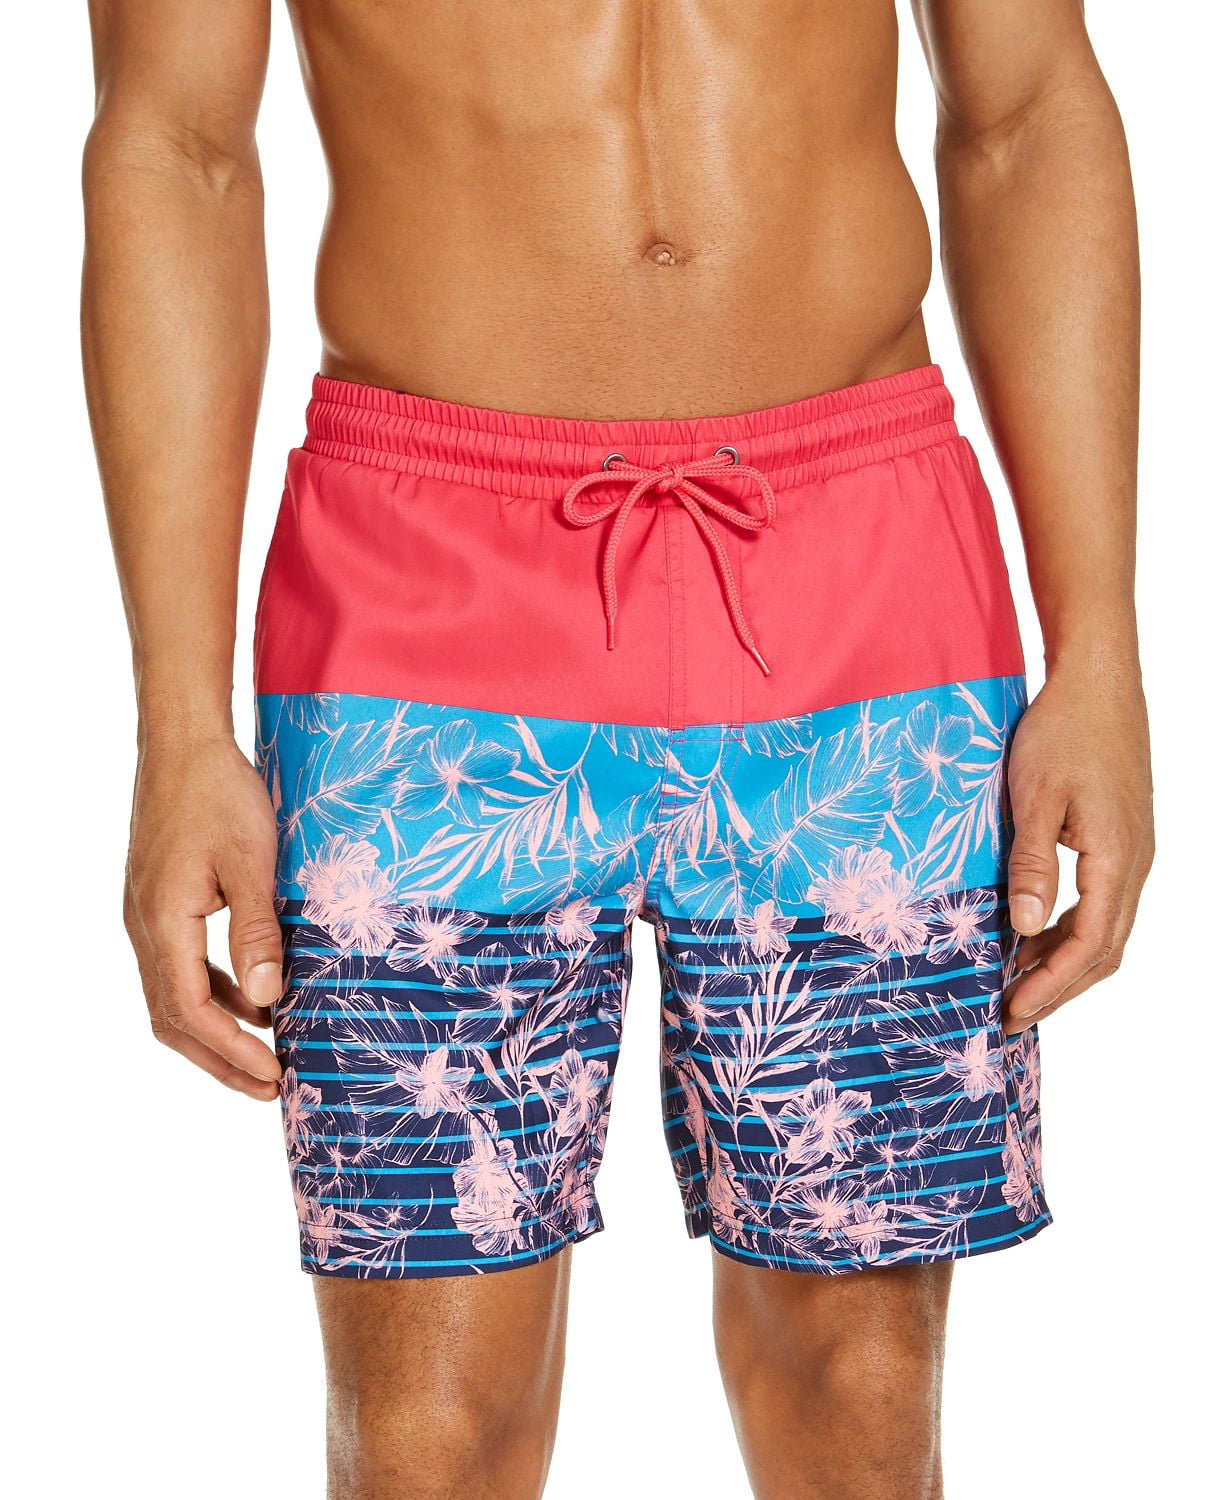 Size XL BNWT Zoggs Mens Coral Swimshorts 